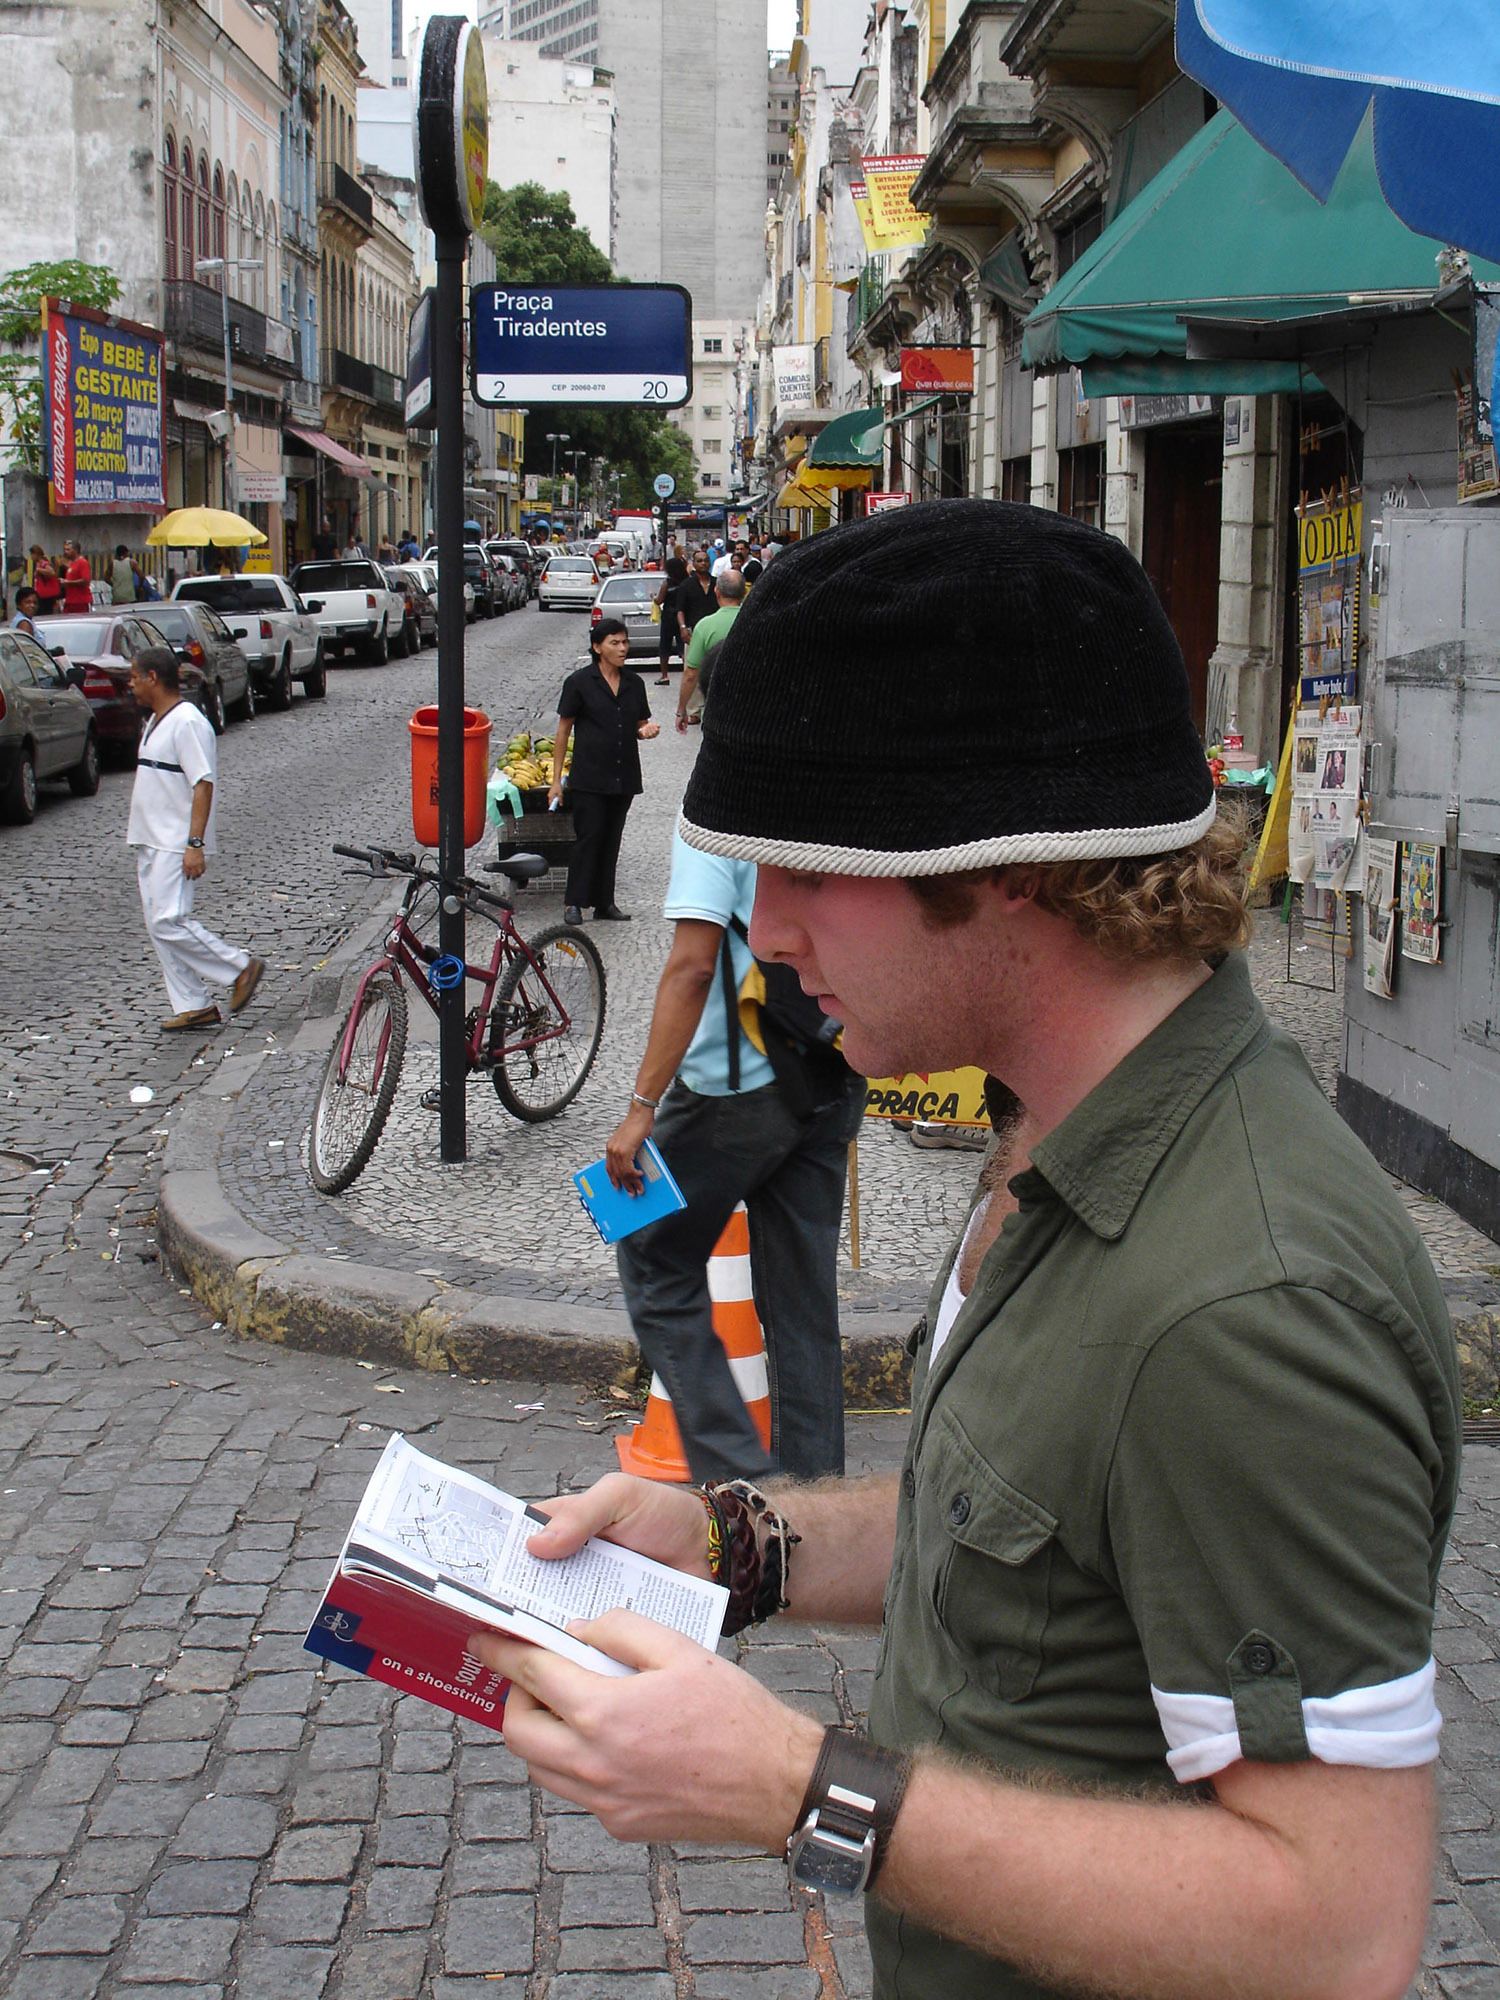 Ben reading Lonely Planet book on the streets of Rio de Janeiro Brazil